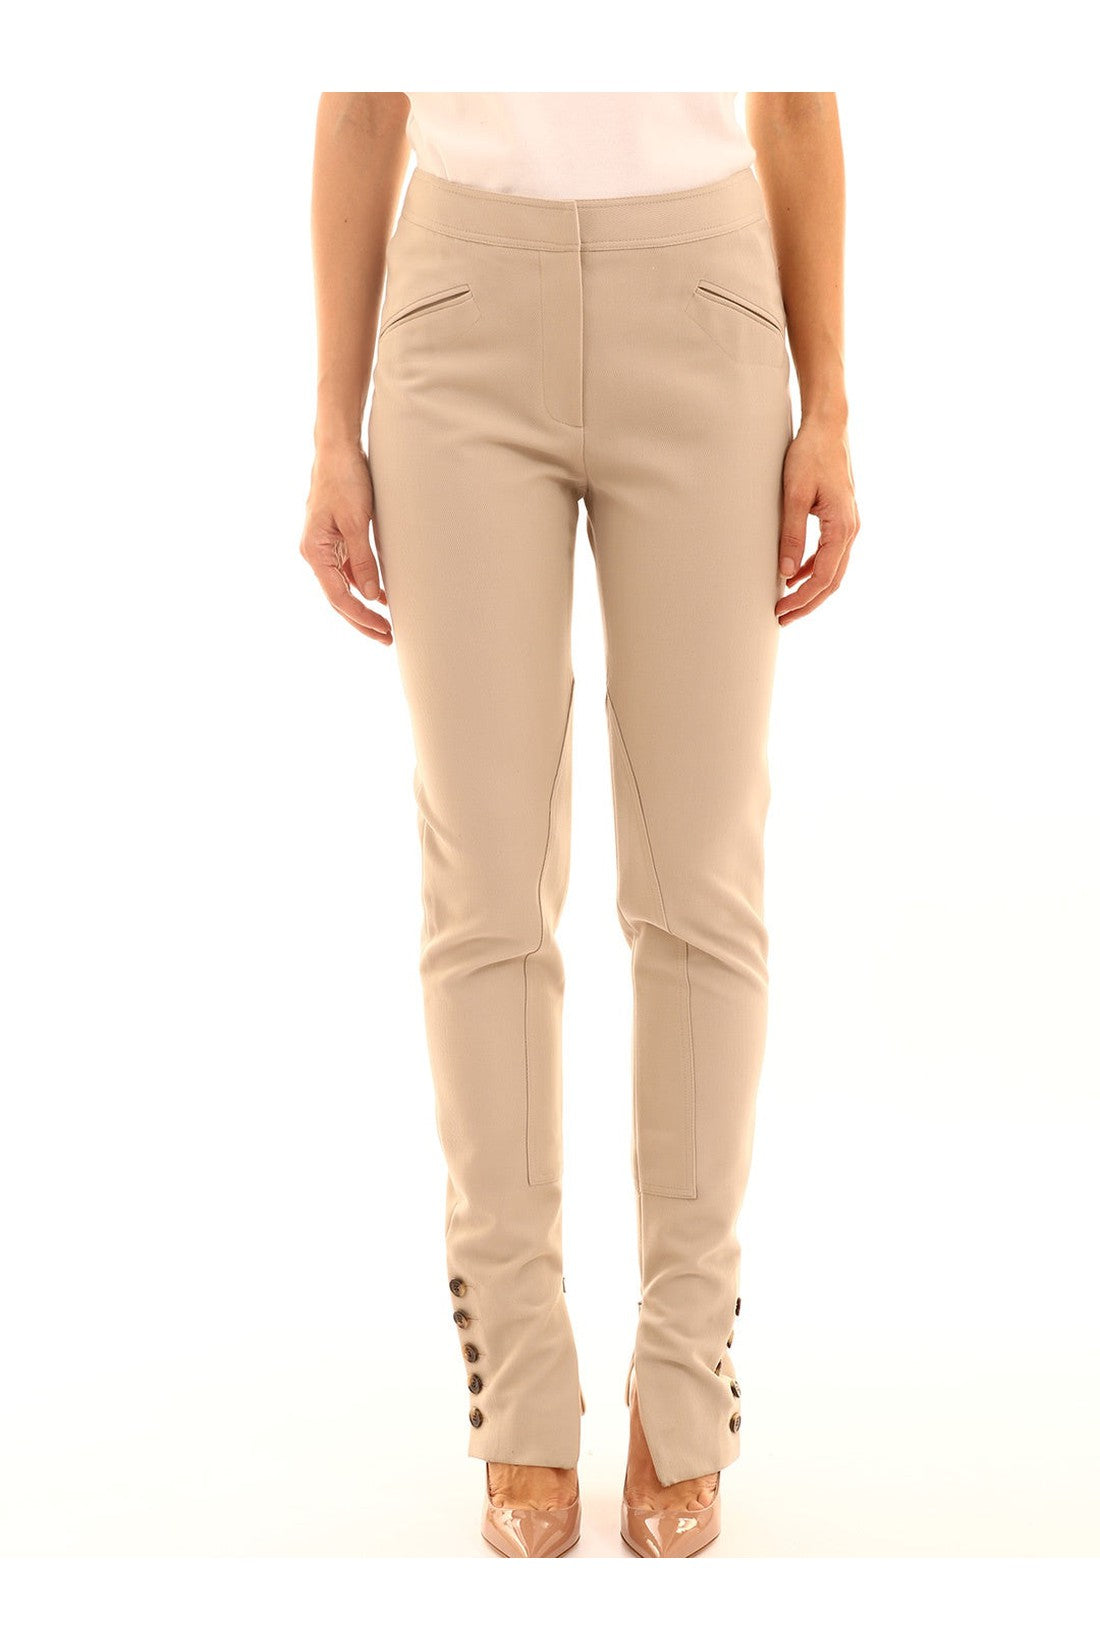 Beige trousers with Botton